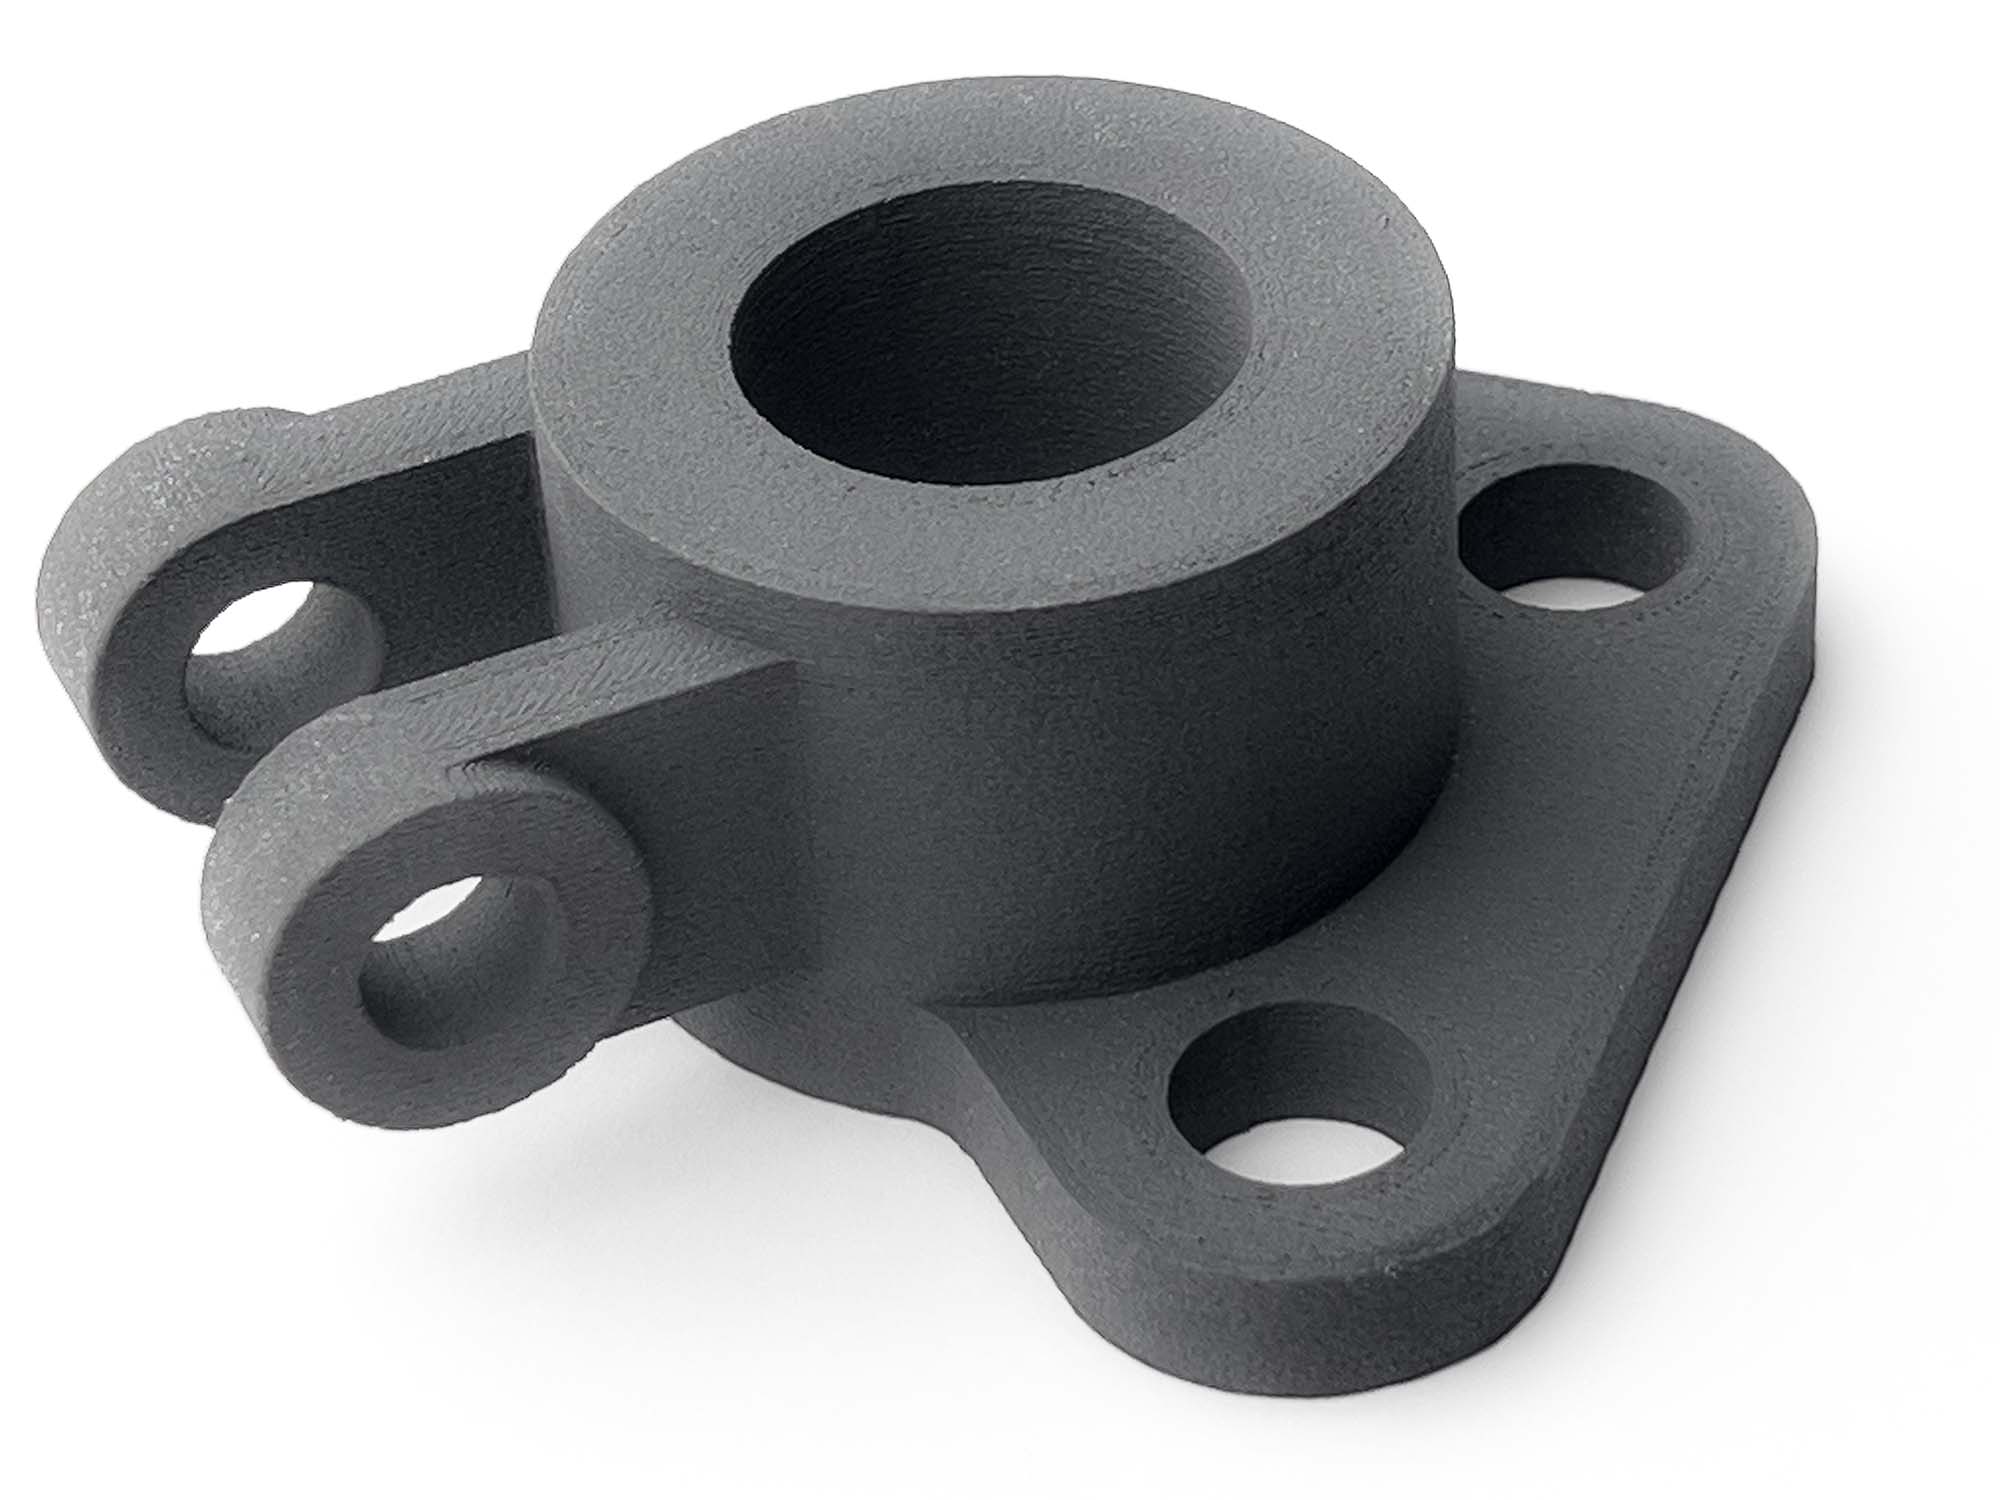 High-performance PPS GF thermoplastic